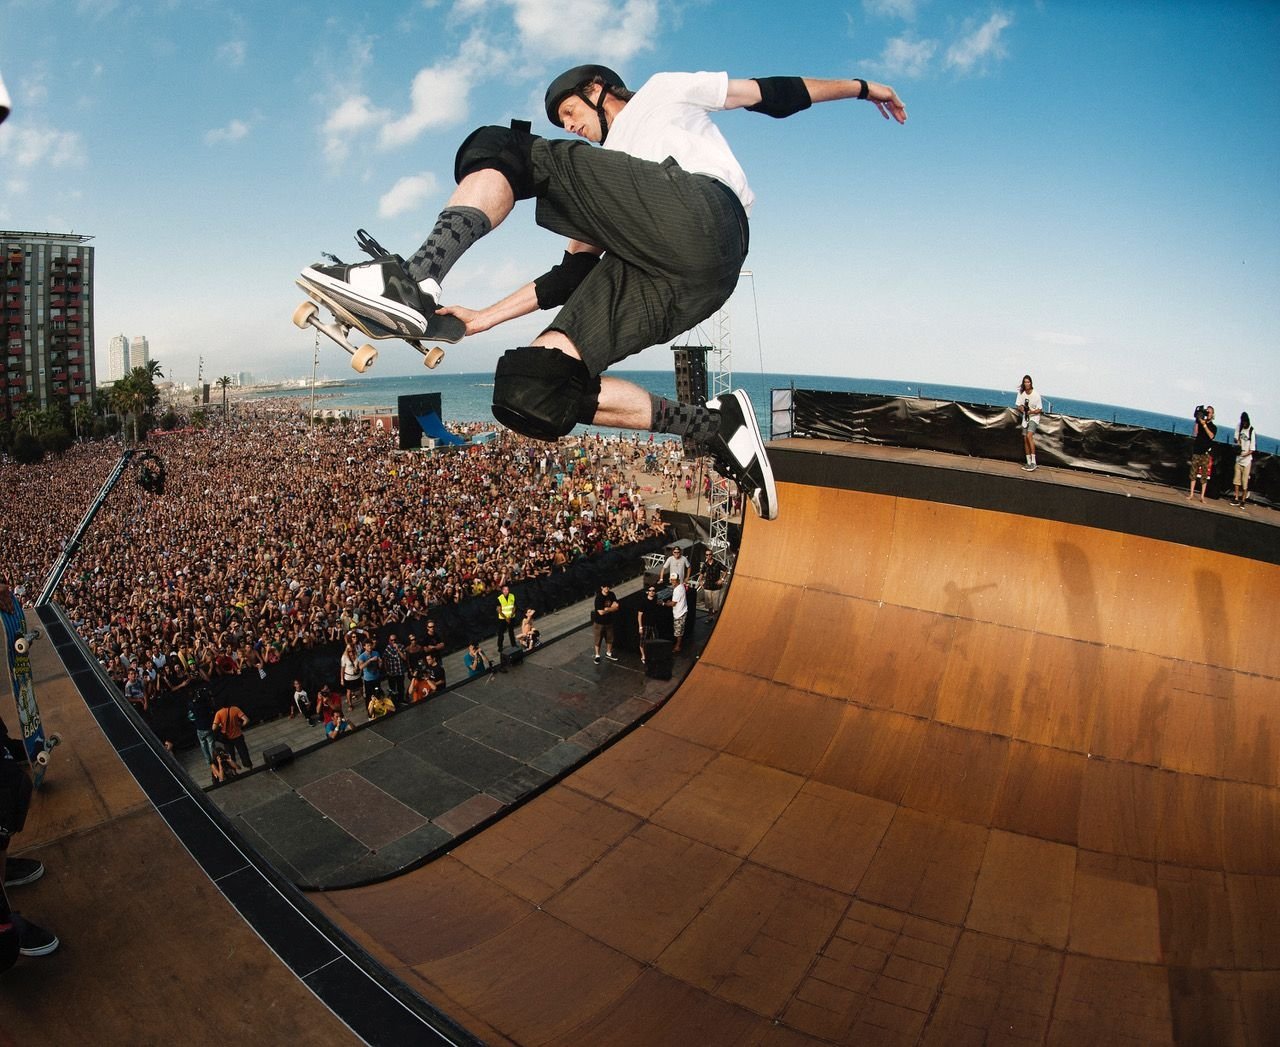 Tony Hawk was paid a 4 million royalty check for Pro Skater games